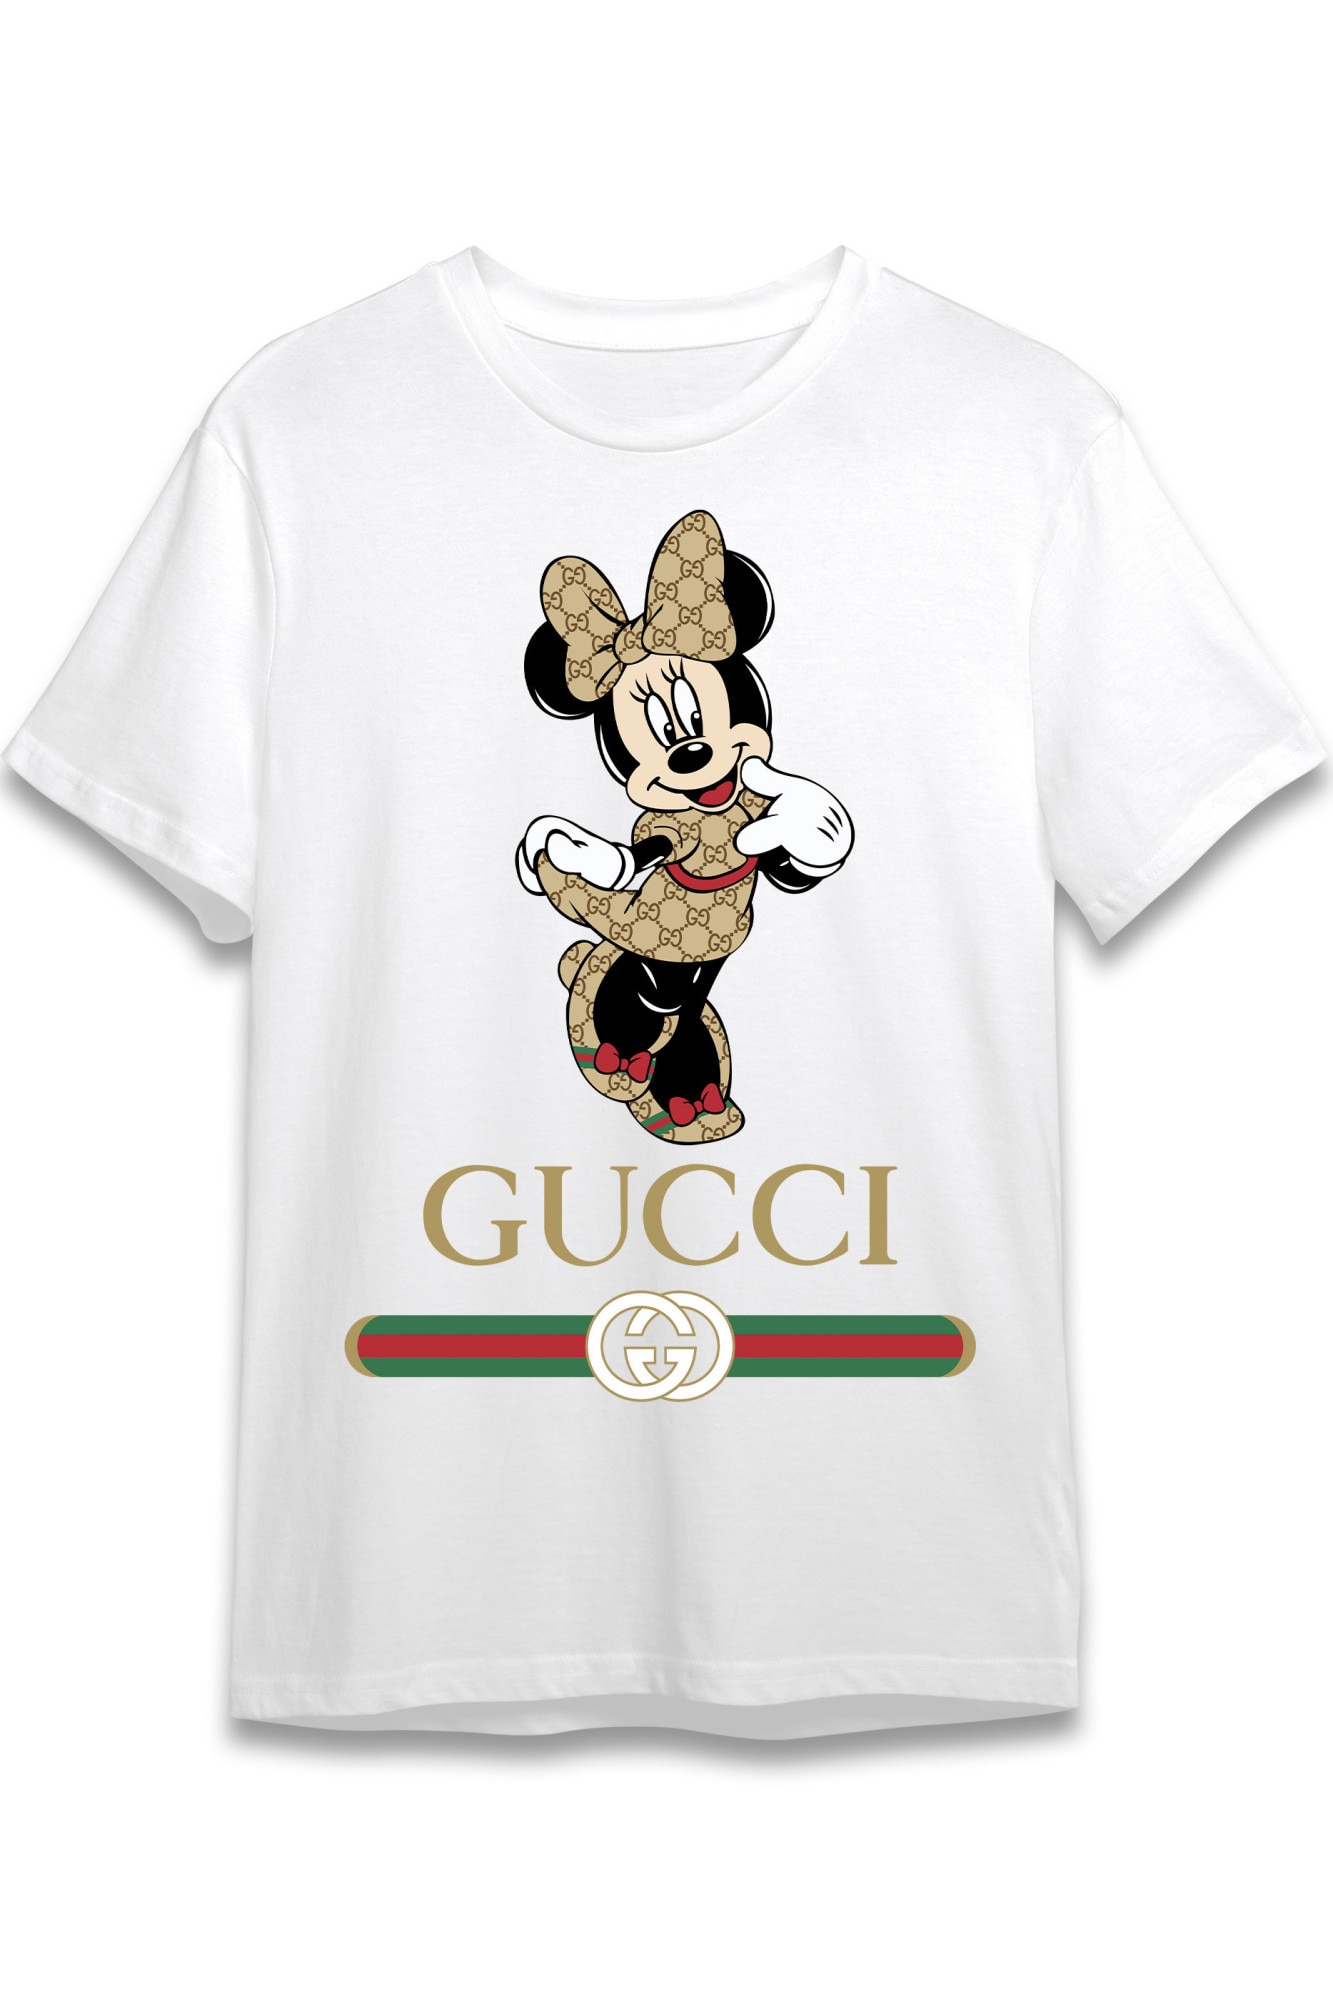 Minnie Mouse in Haine Gucci, Parodie Gucci, Unisex, 100% Bumbac, Alb, M - eMAG.ro